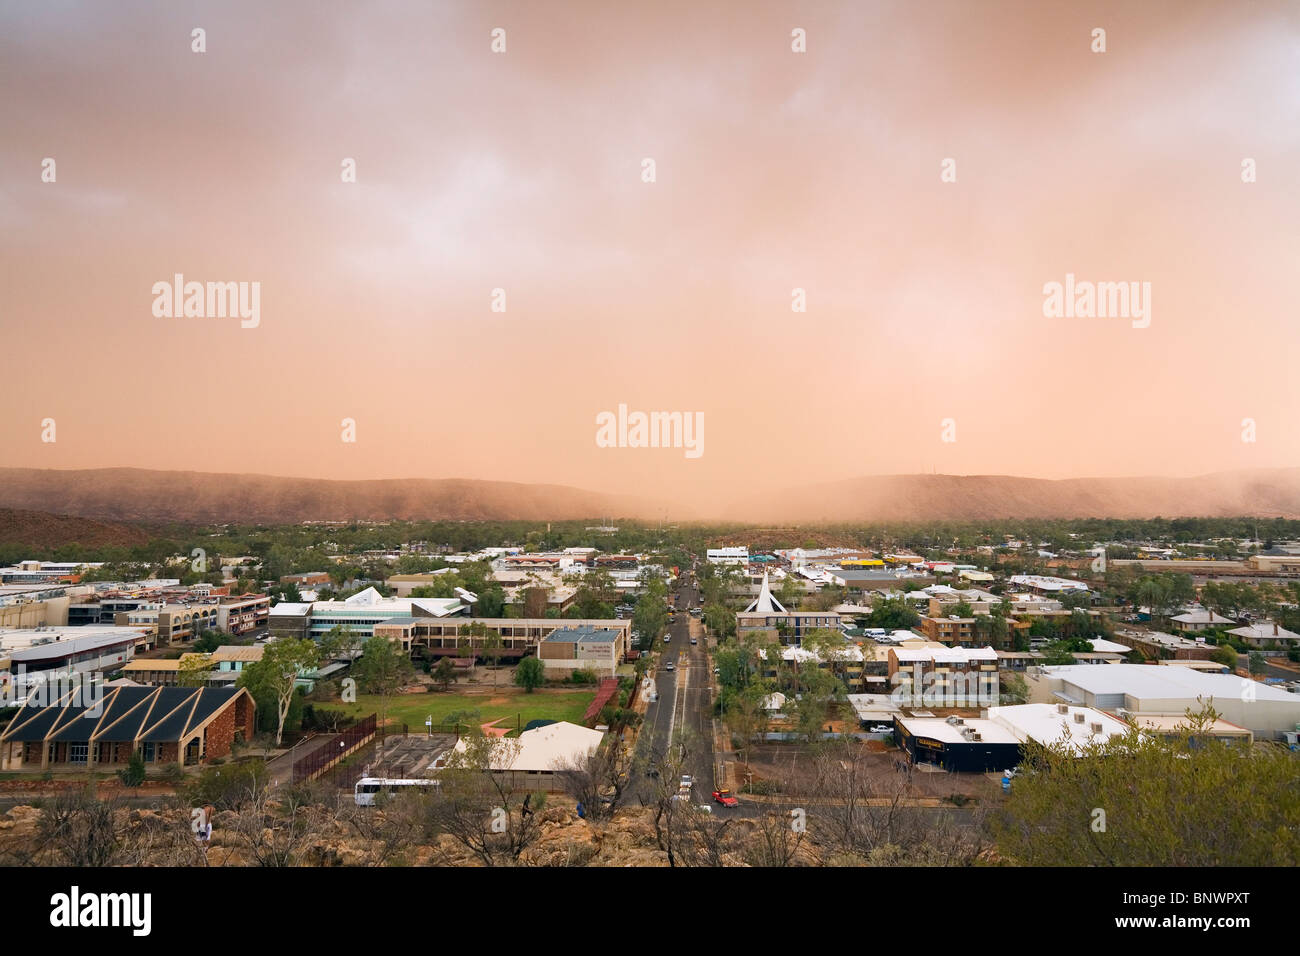 Outback Towns Australia High Resolution Photography and Images - Alamy